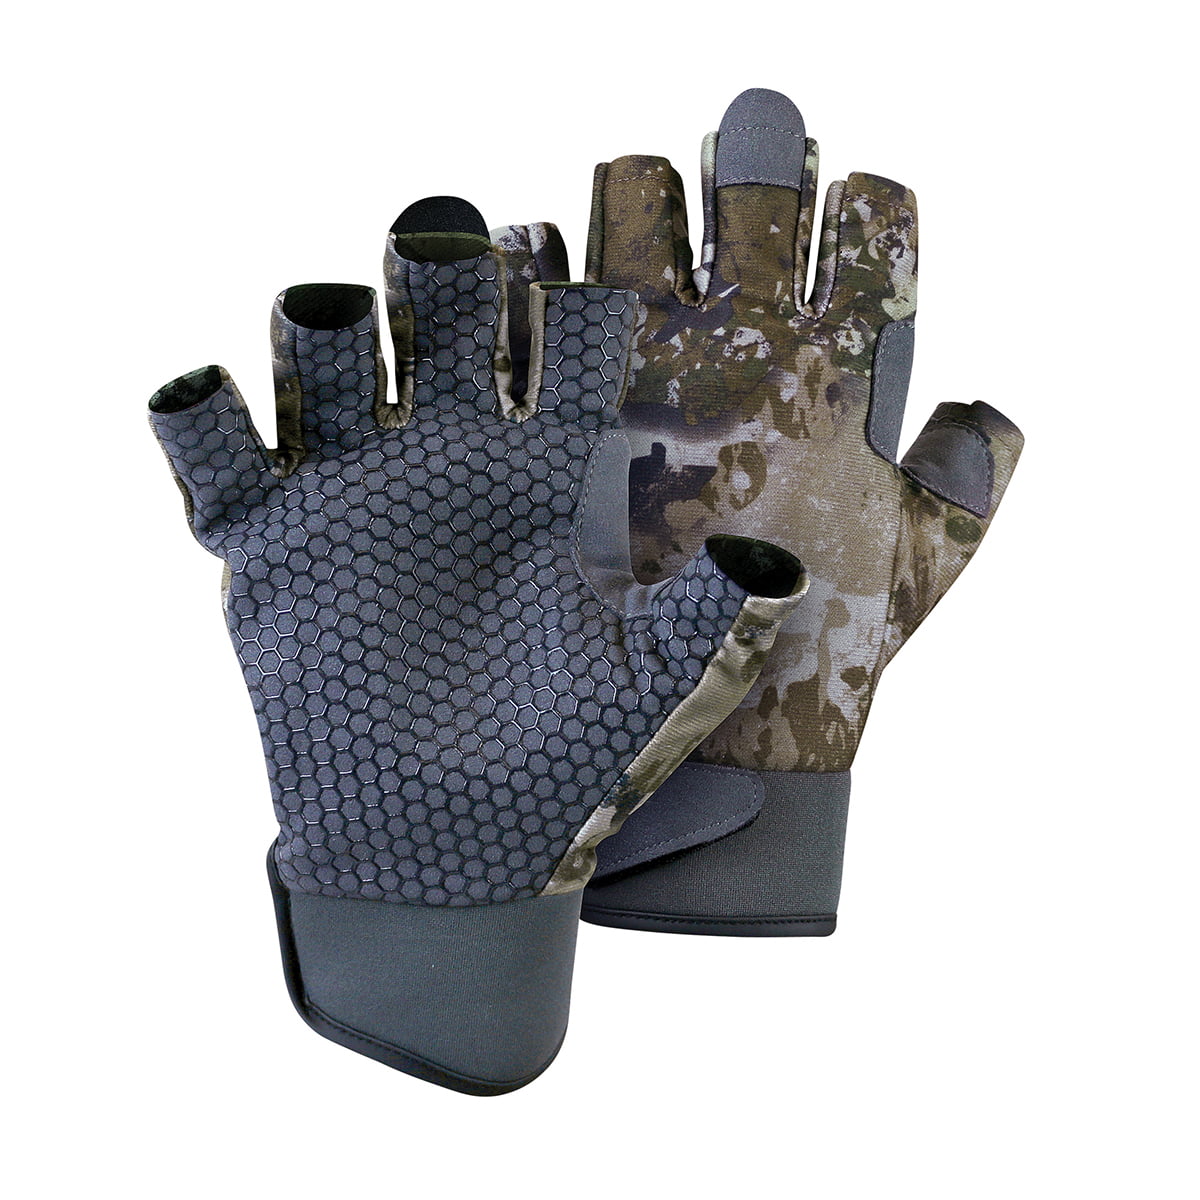 Spika Guide Fingerless Gloves - Biarri Camo - S - Mansfield Hunting & Fishing - Products to prepare for Corona Virus